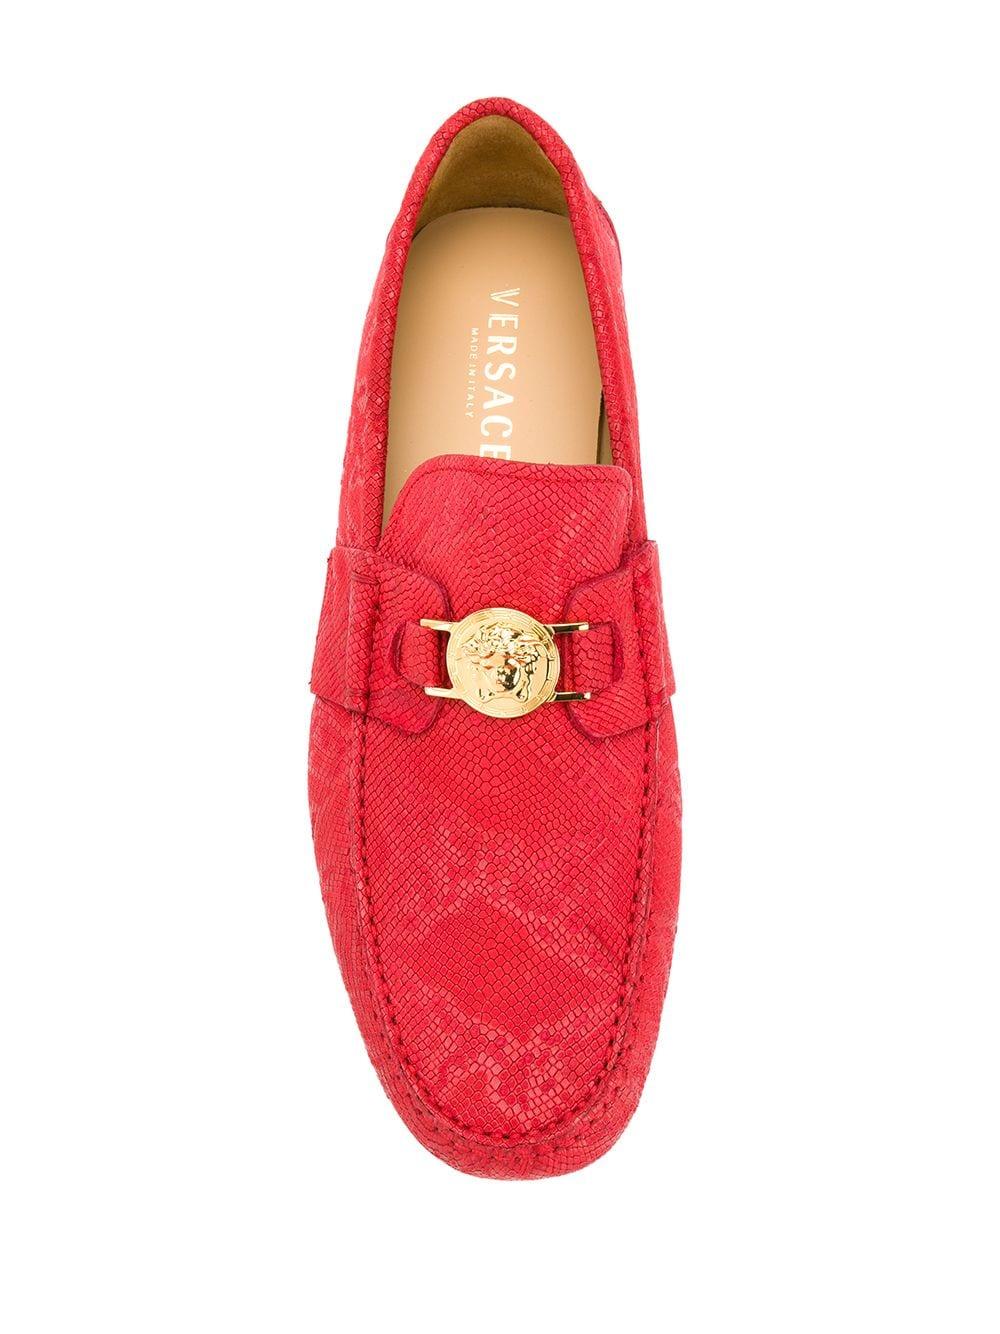 Versace Leather Medusa Loafers in for Men